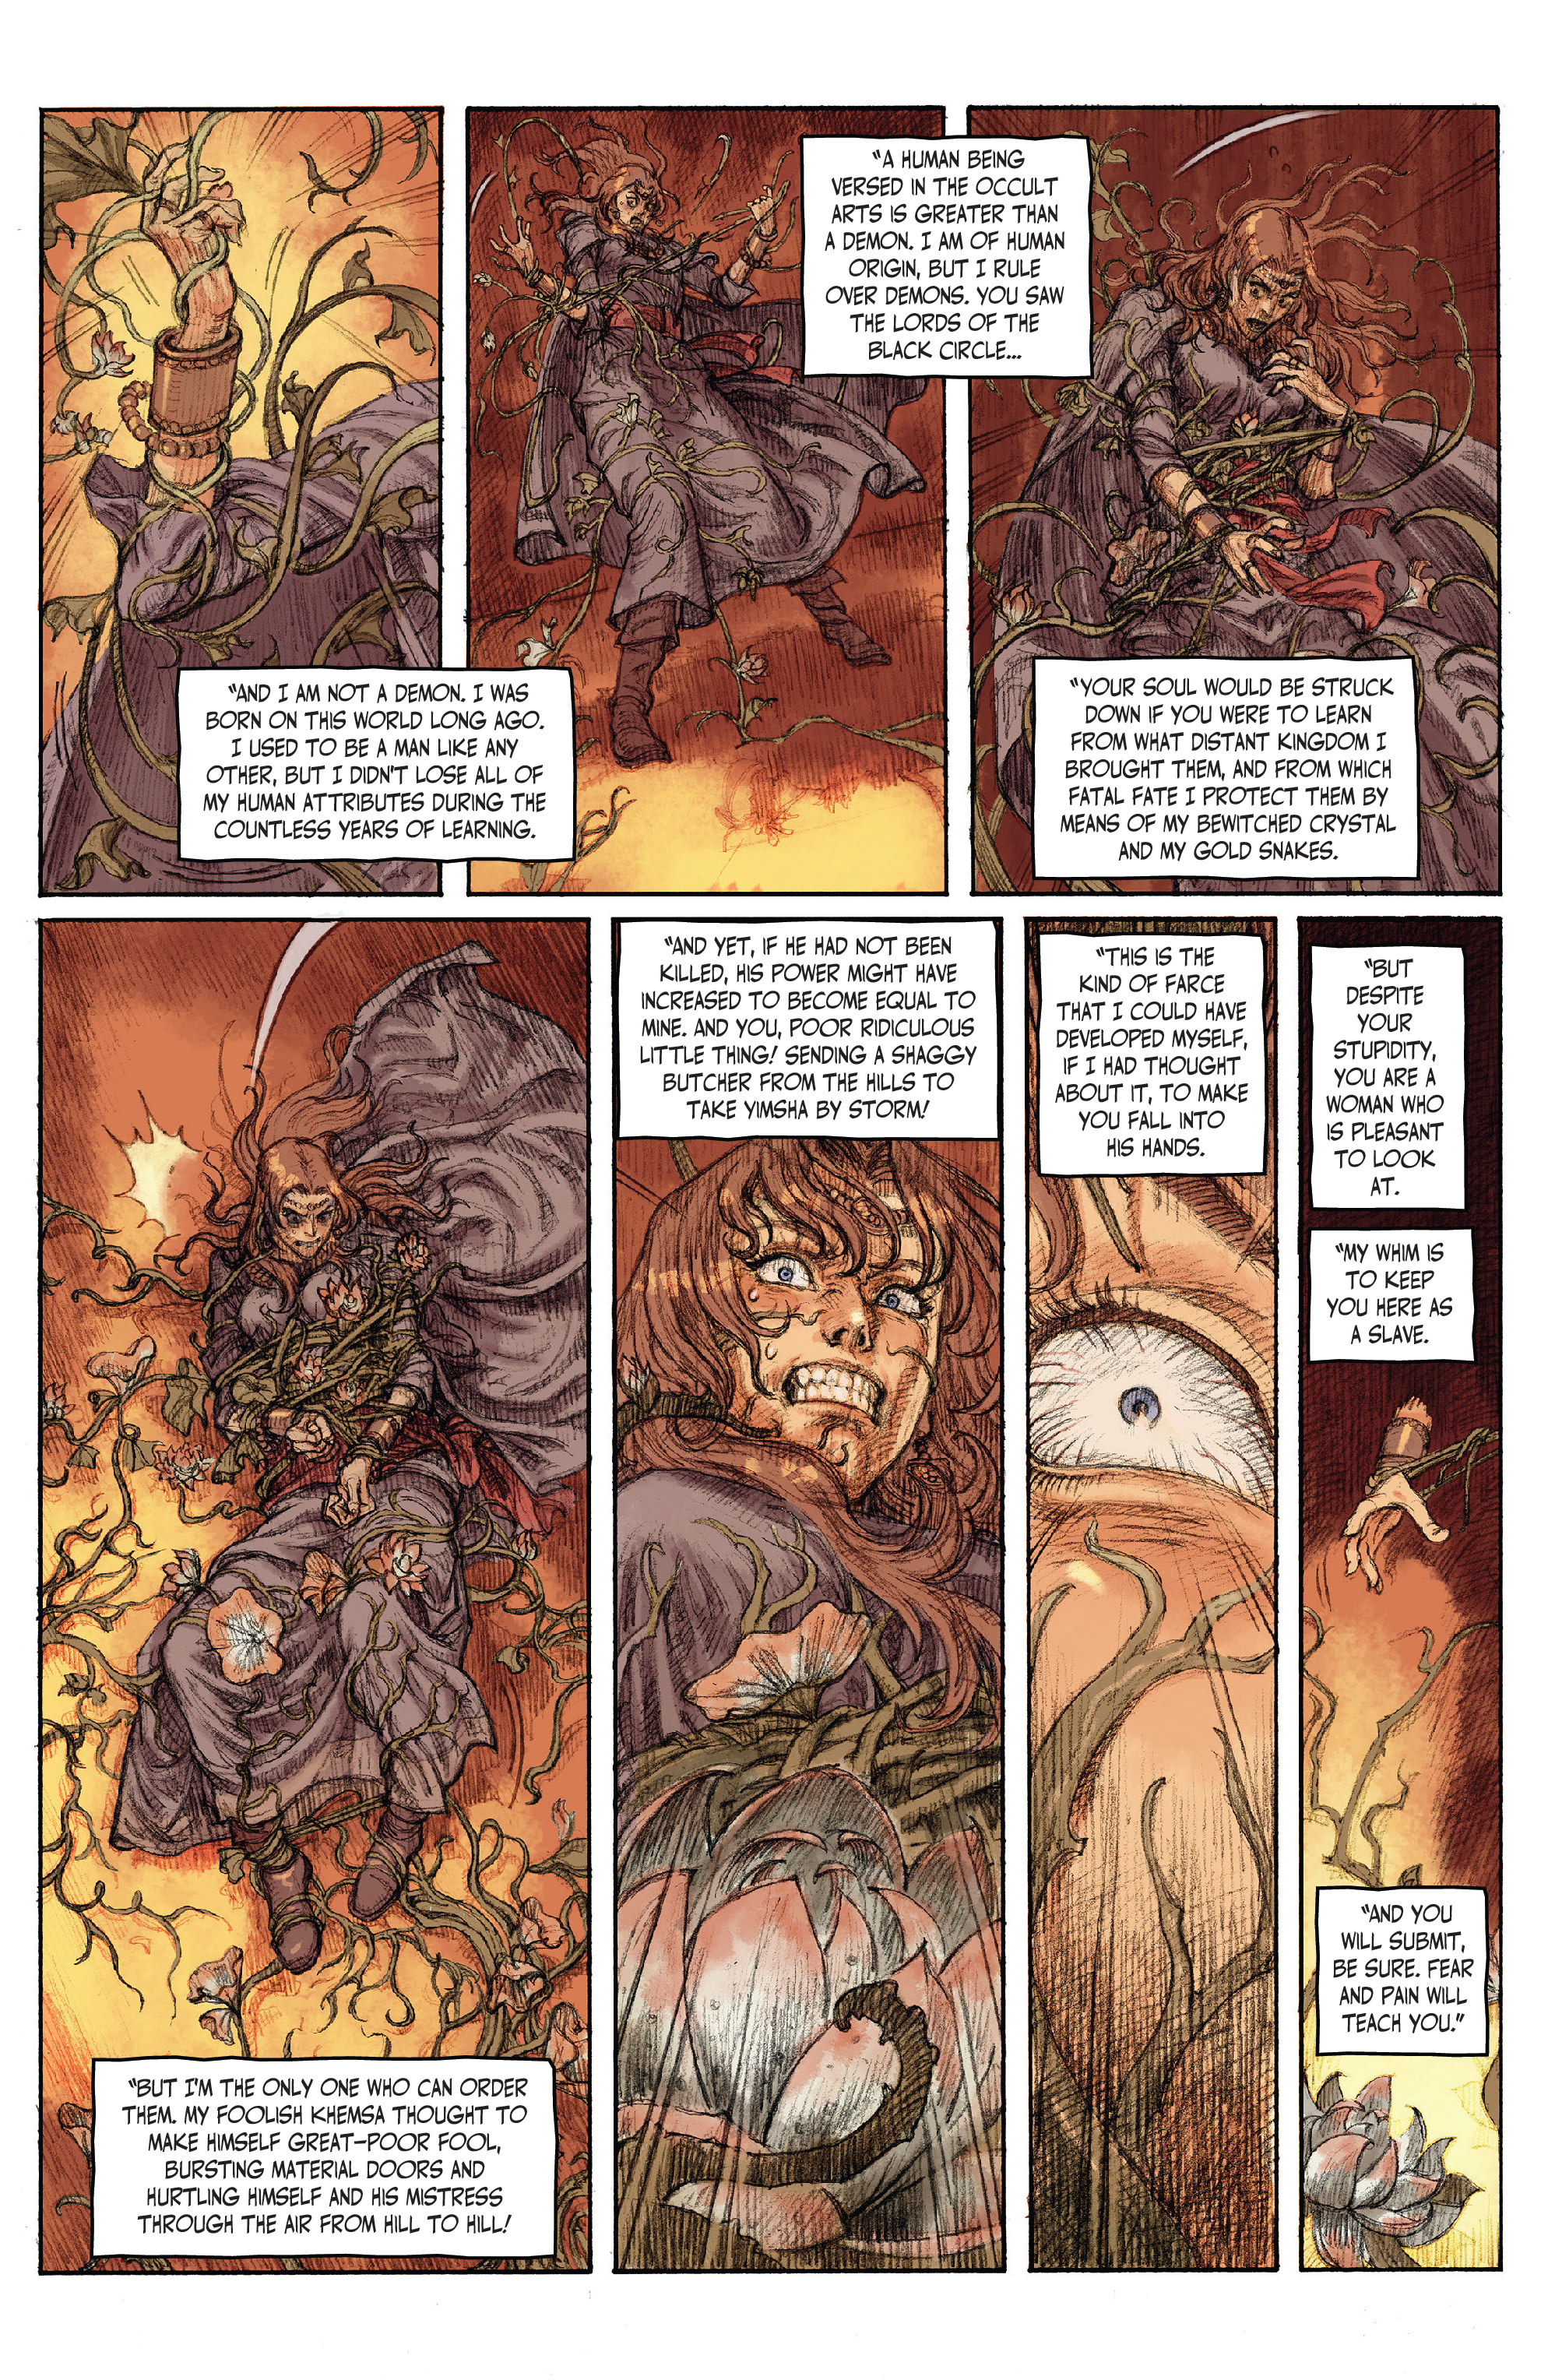 The Cimmerian: People of the Black Circle (2020-): Chapter 3 - Page 4